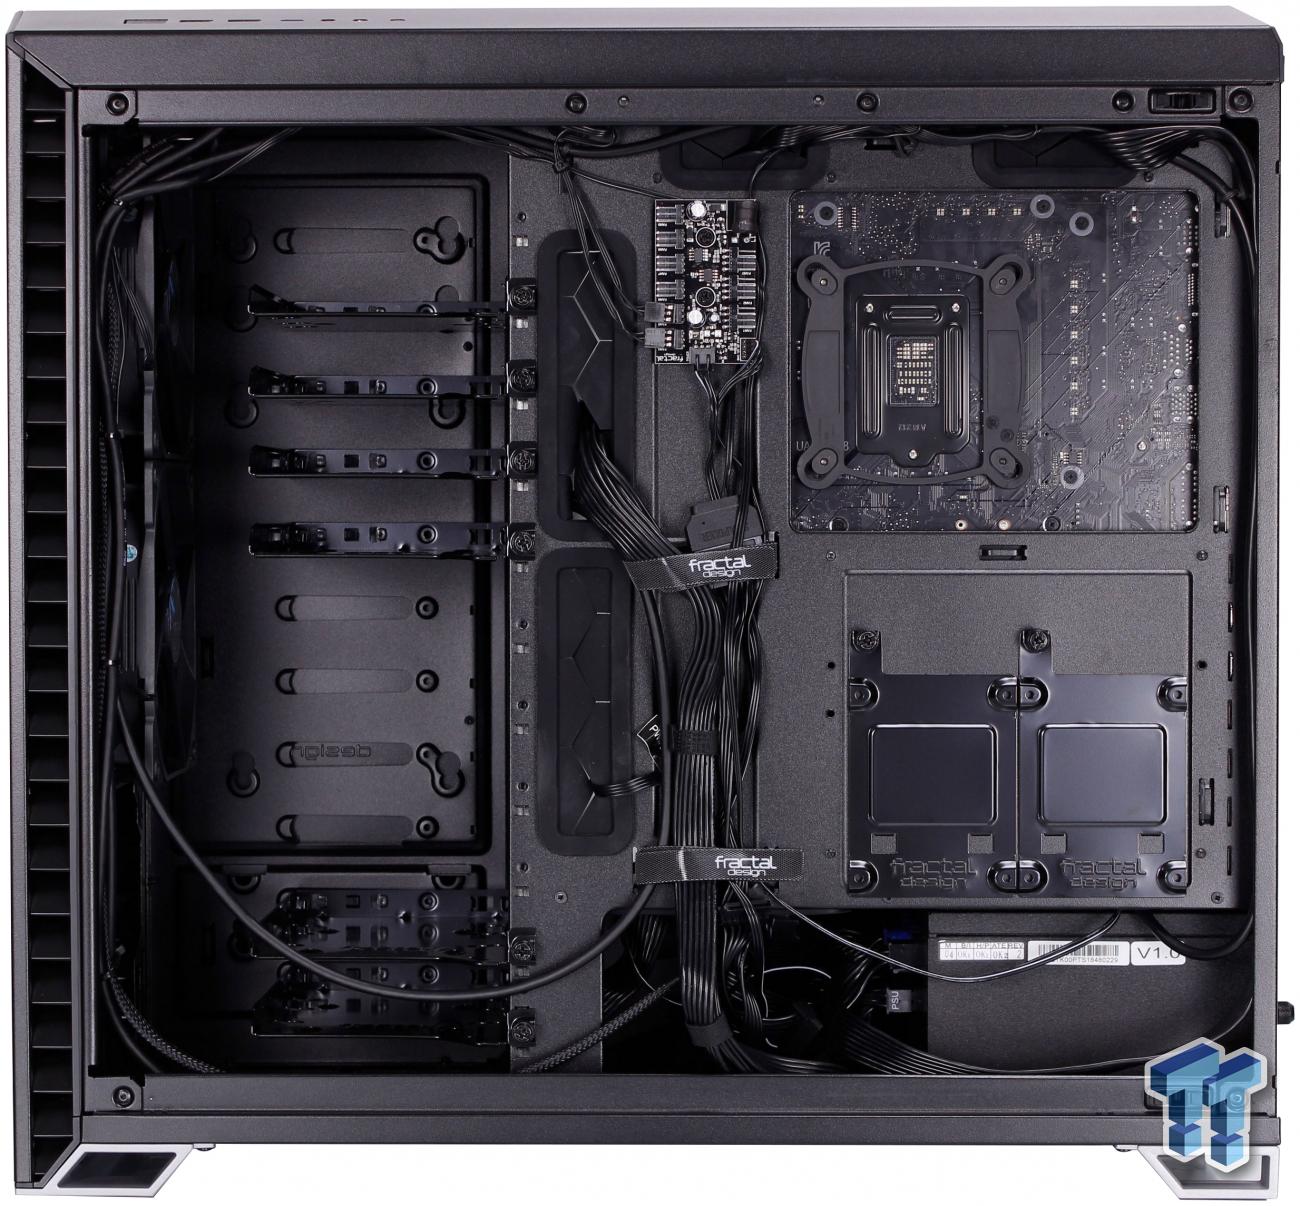 Introducing Vector RS – a new mid-tower from Fractal Design